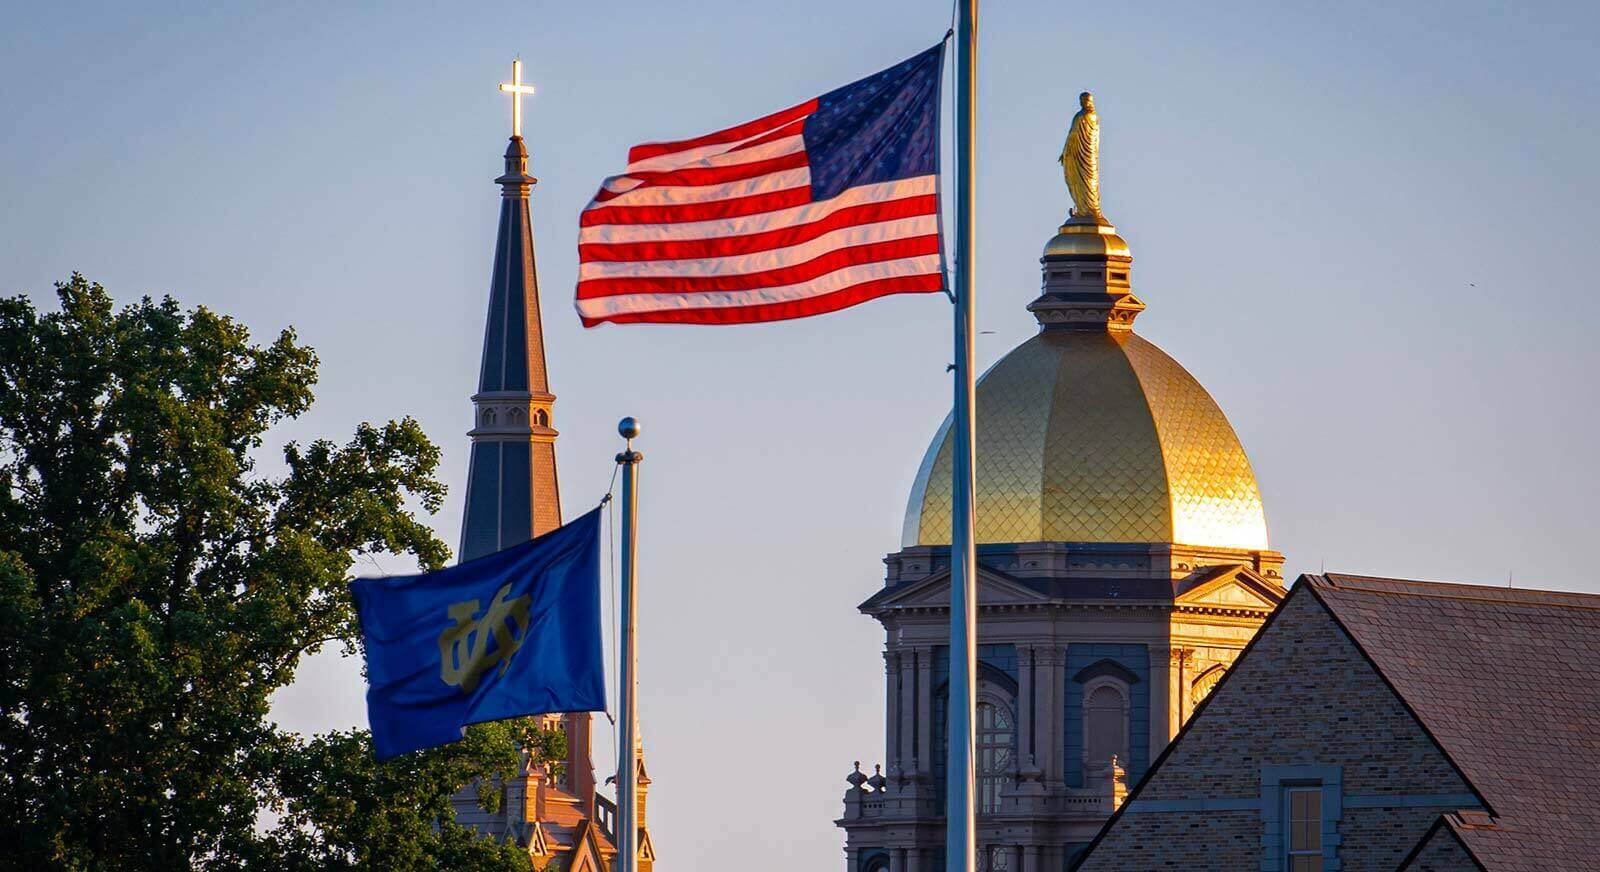 The U.S. flag along with an ND flag fly in front of the Golden Dome and Basilica during the afternoon.